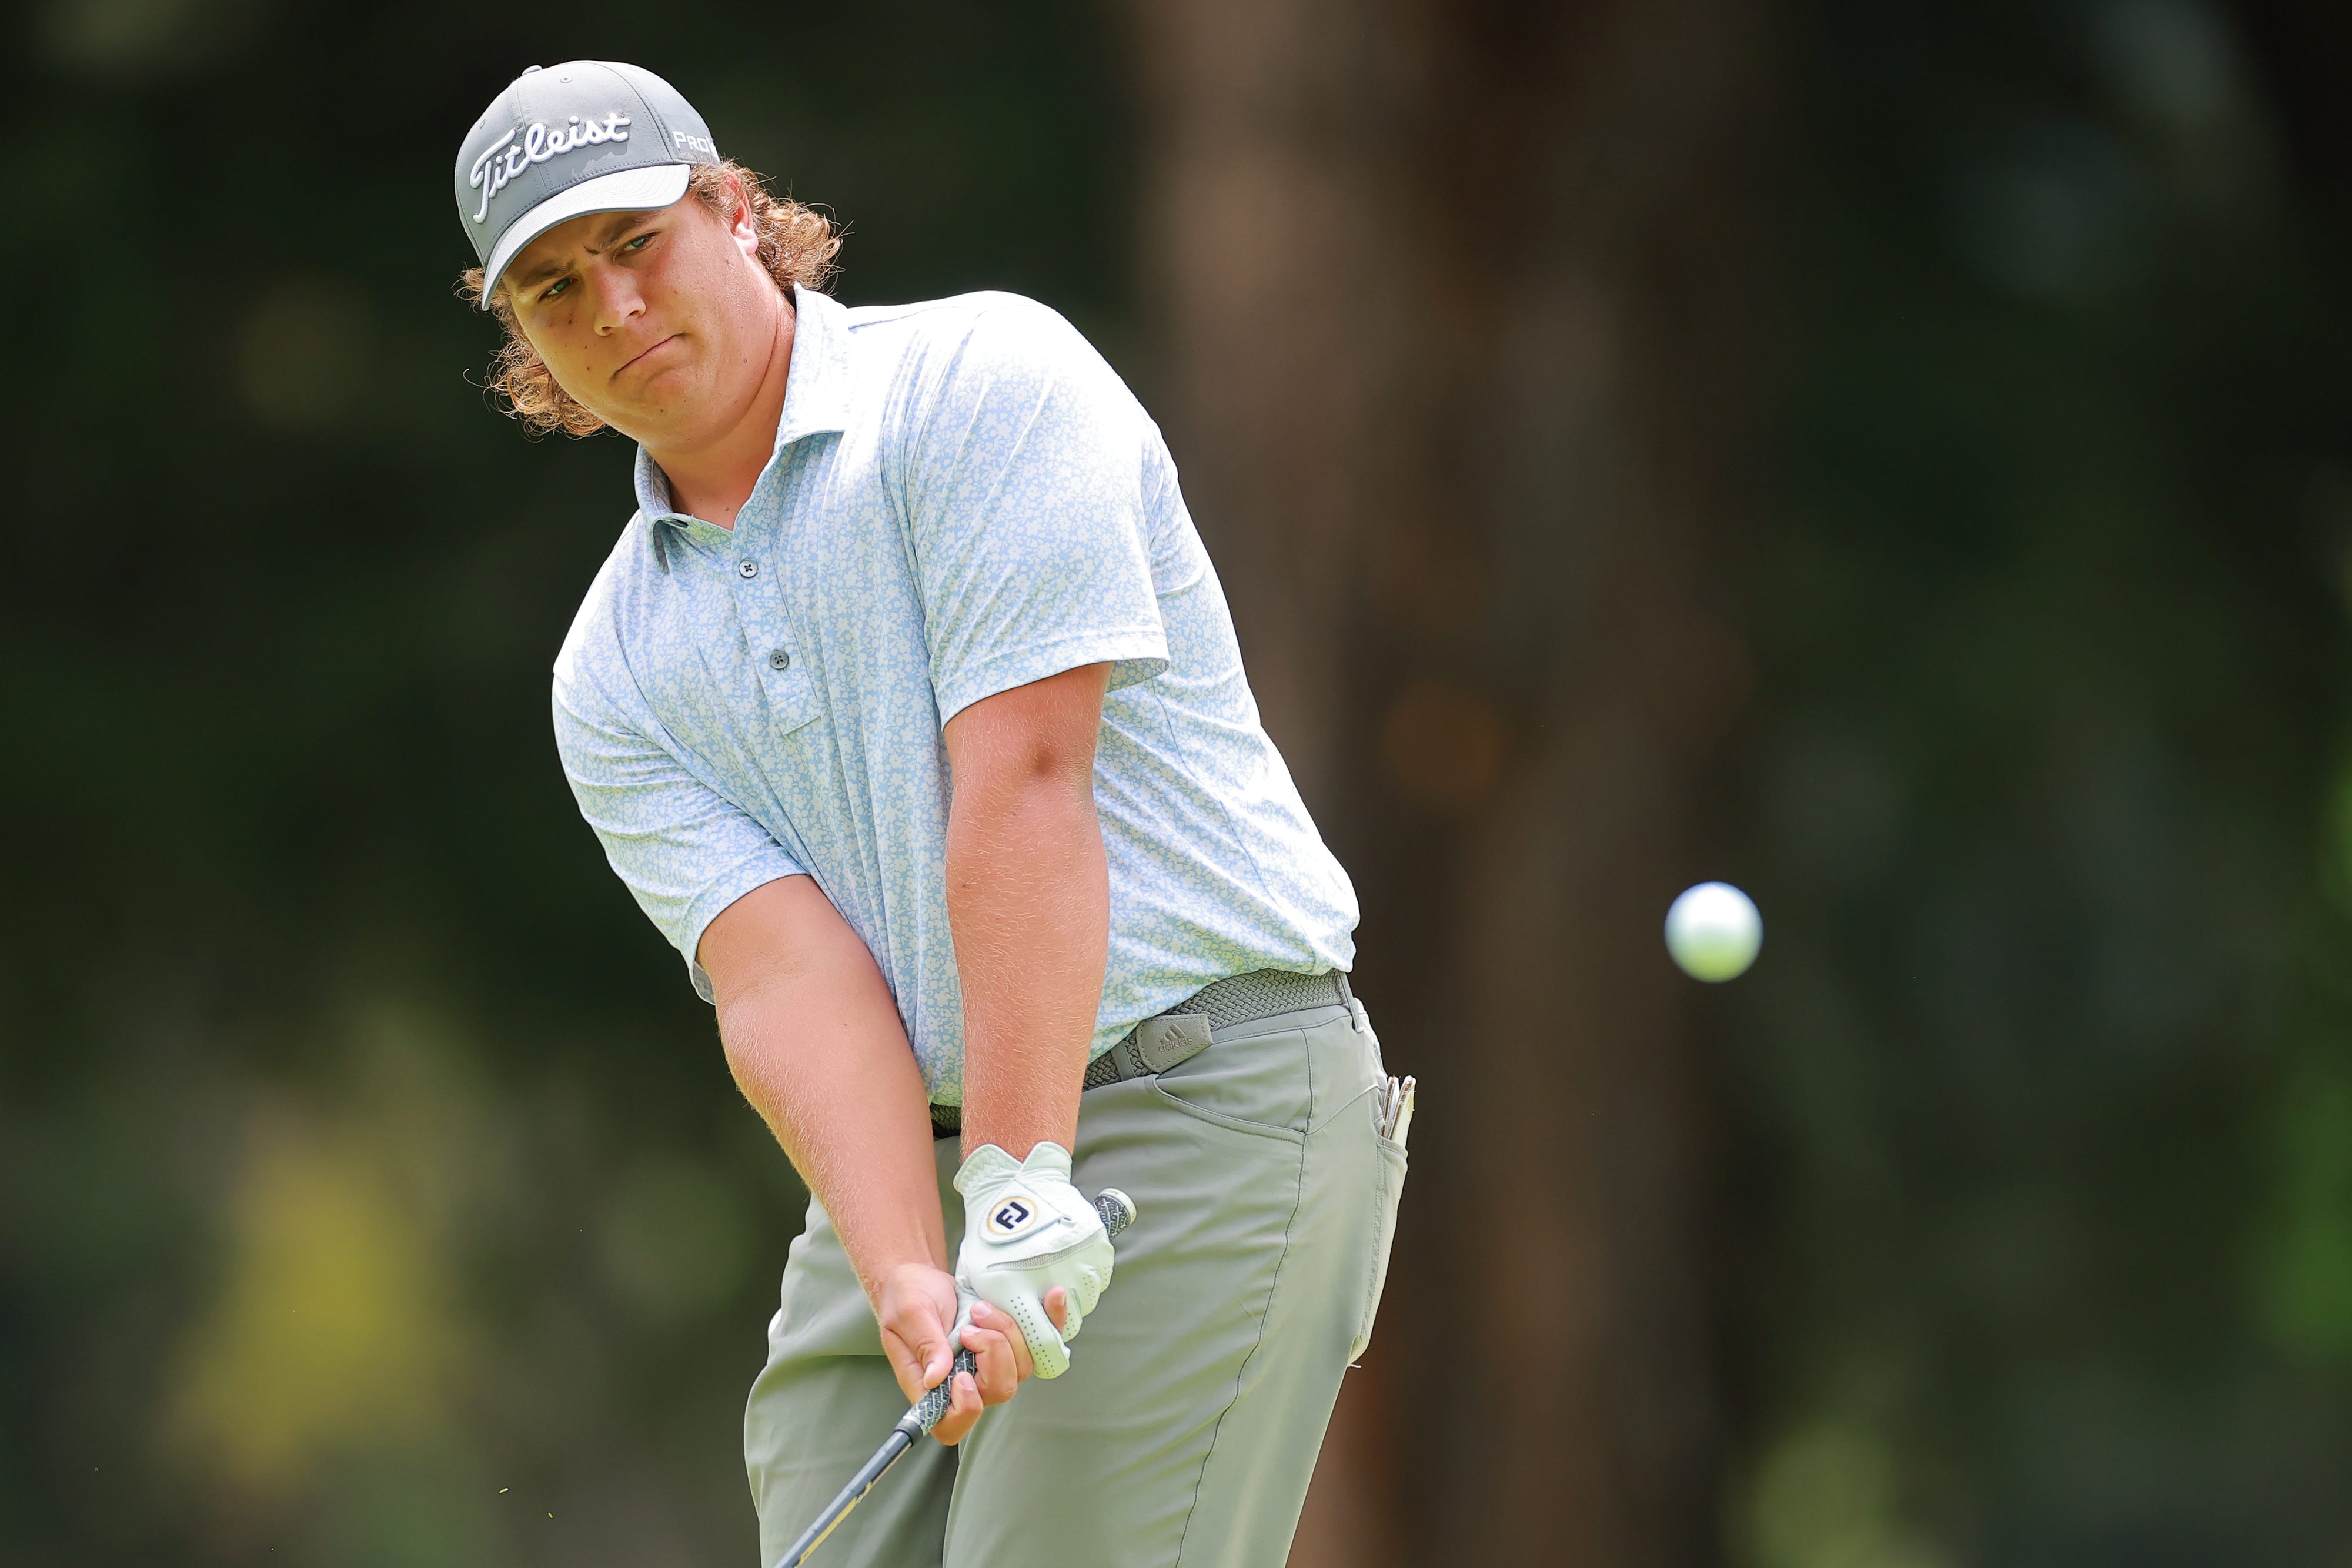 19-year-old aldrich potgieter shoots second sub-60 score in as many days on korn ferry tour